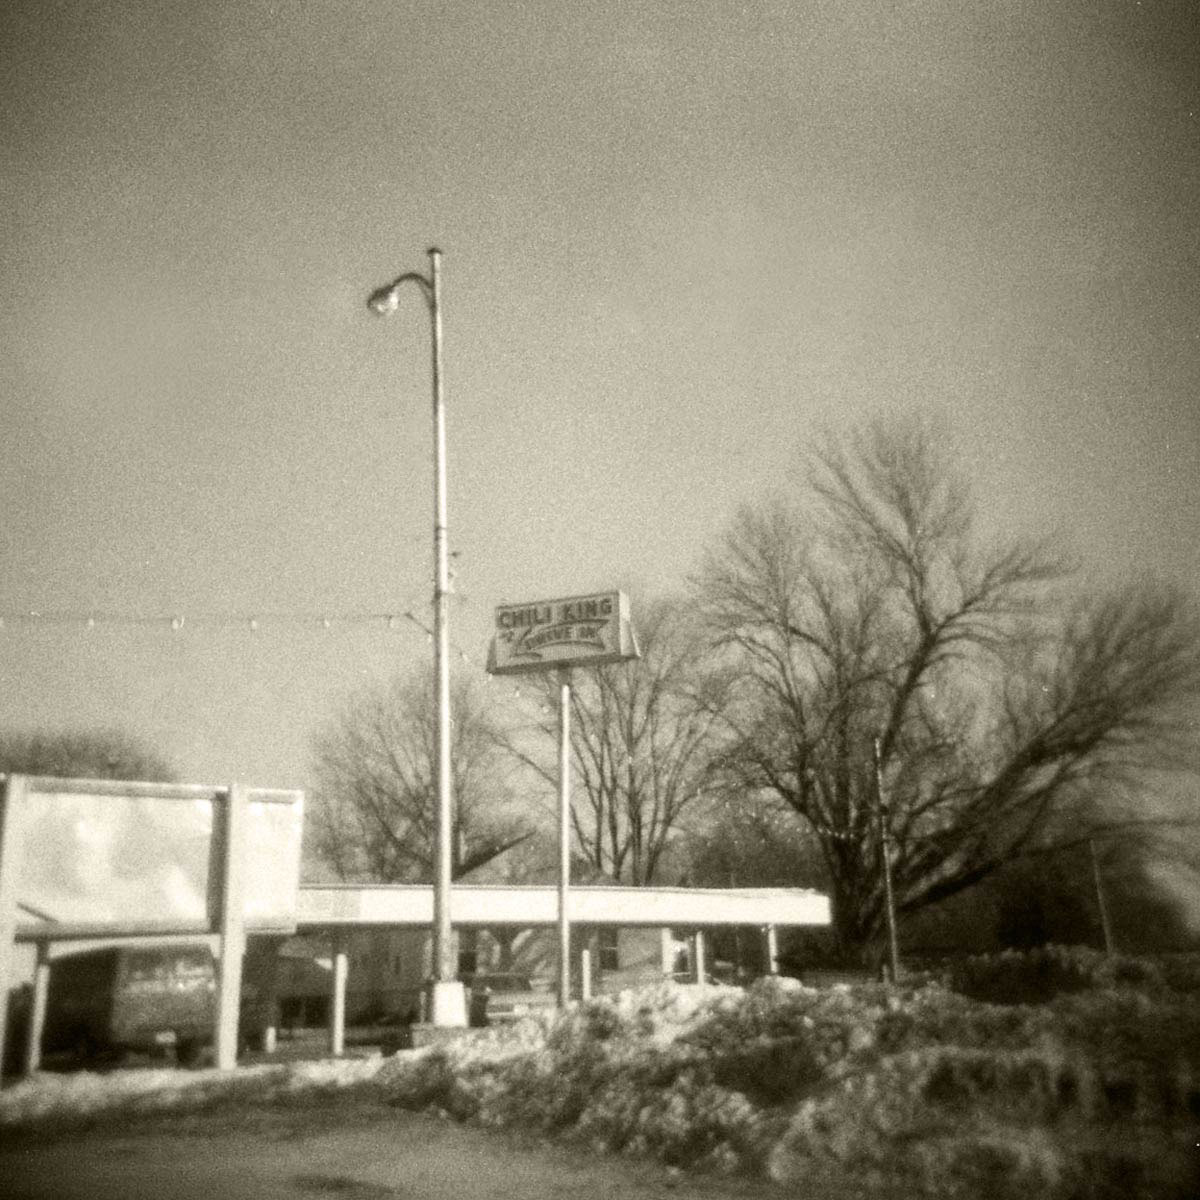 des moines black and white Limitations holga Billboards Signage Frosty Freeze found beauty discovery sidewalk exploration